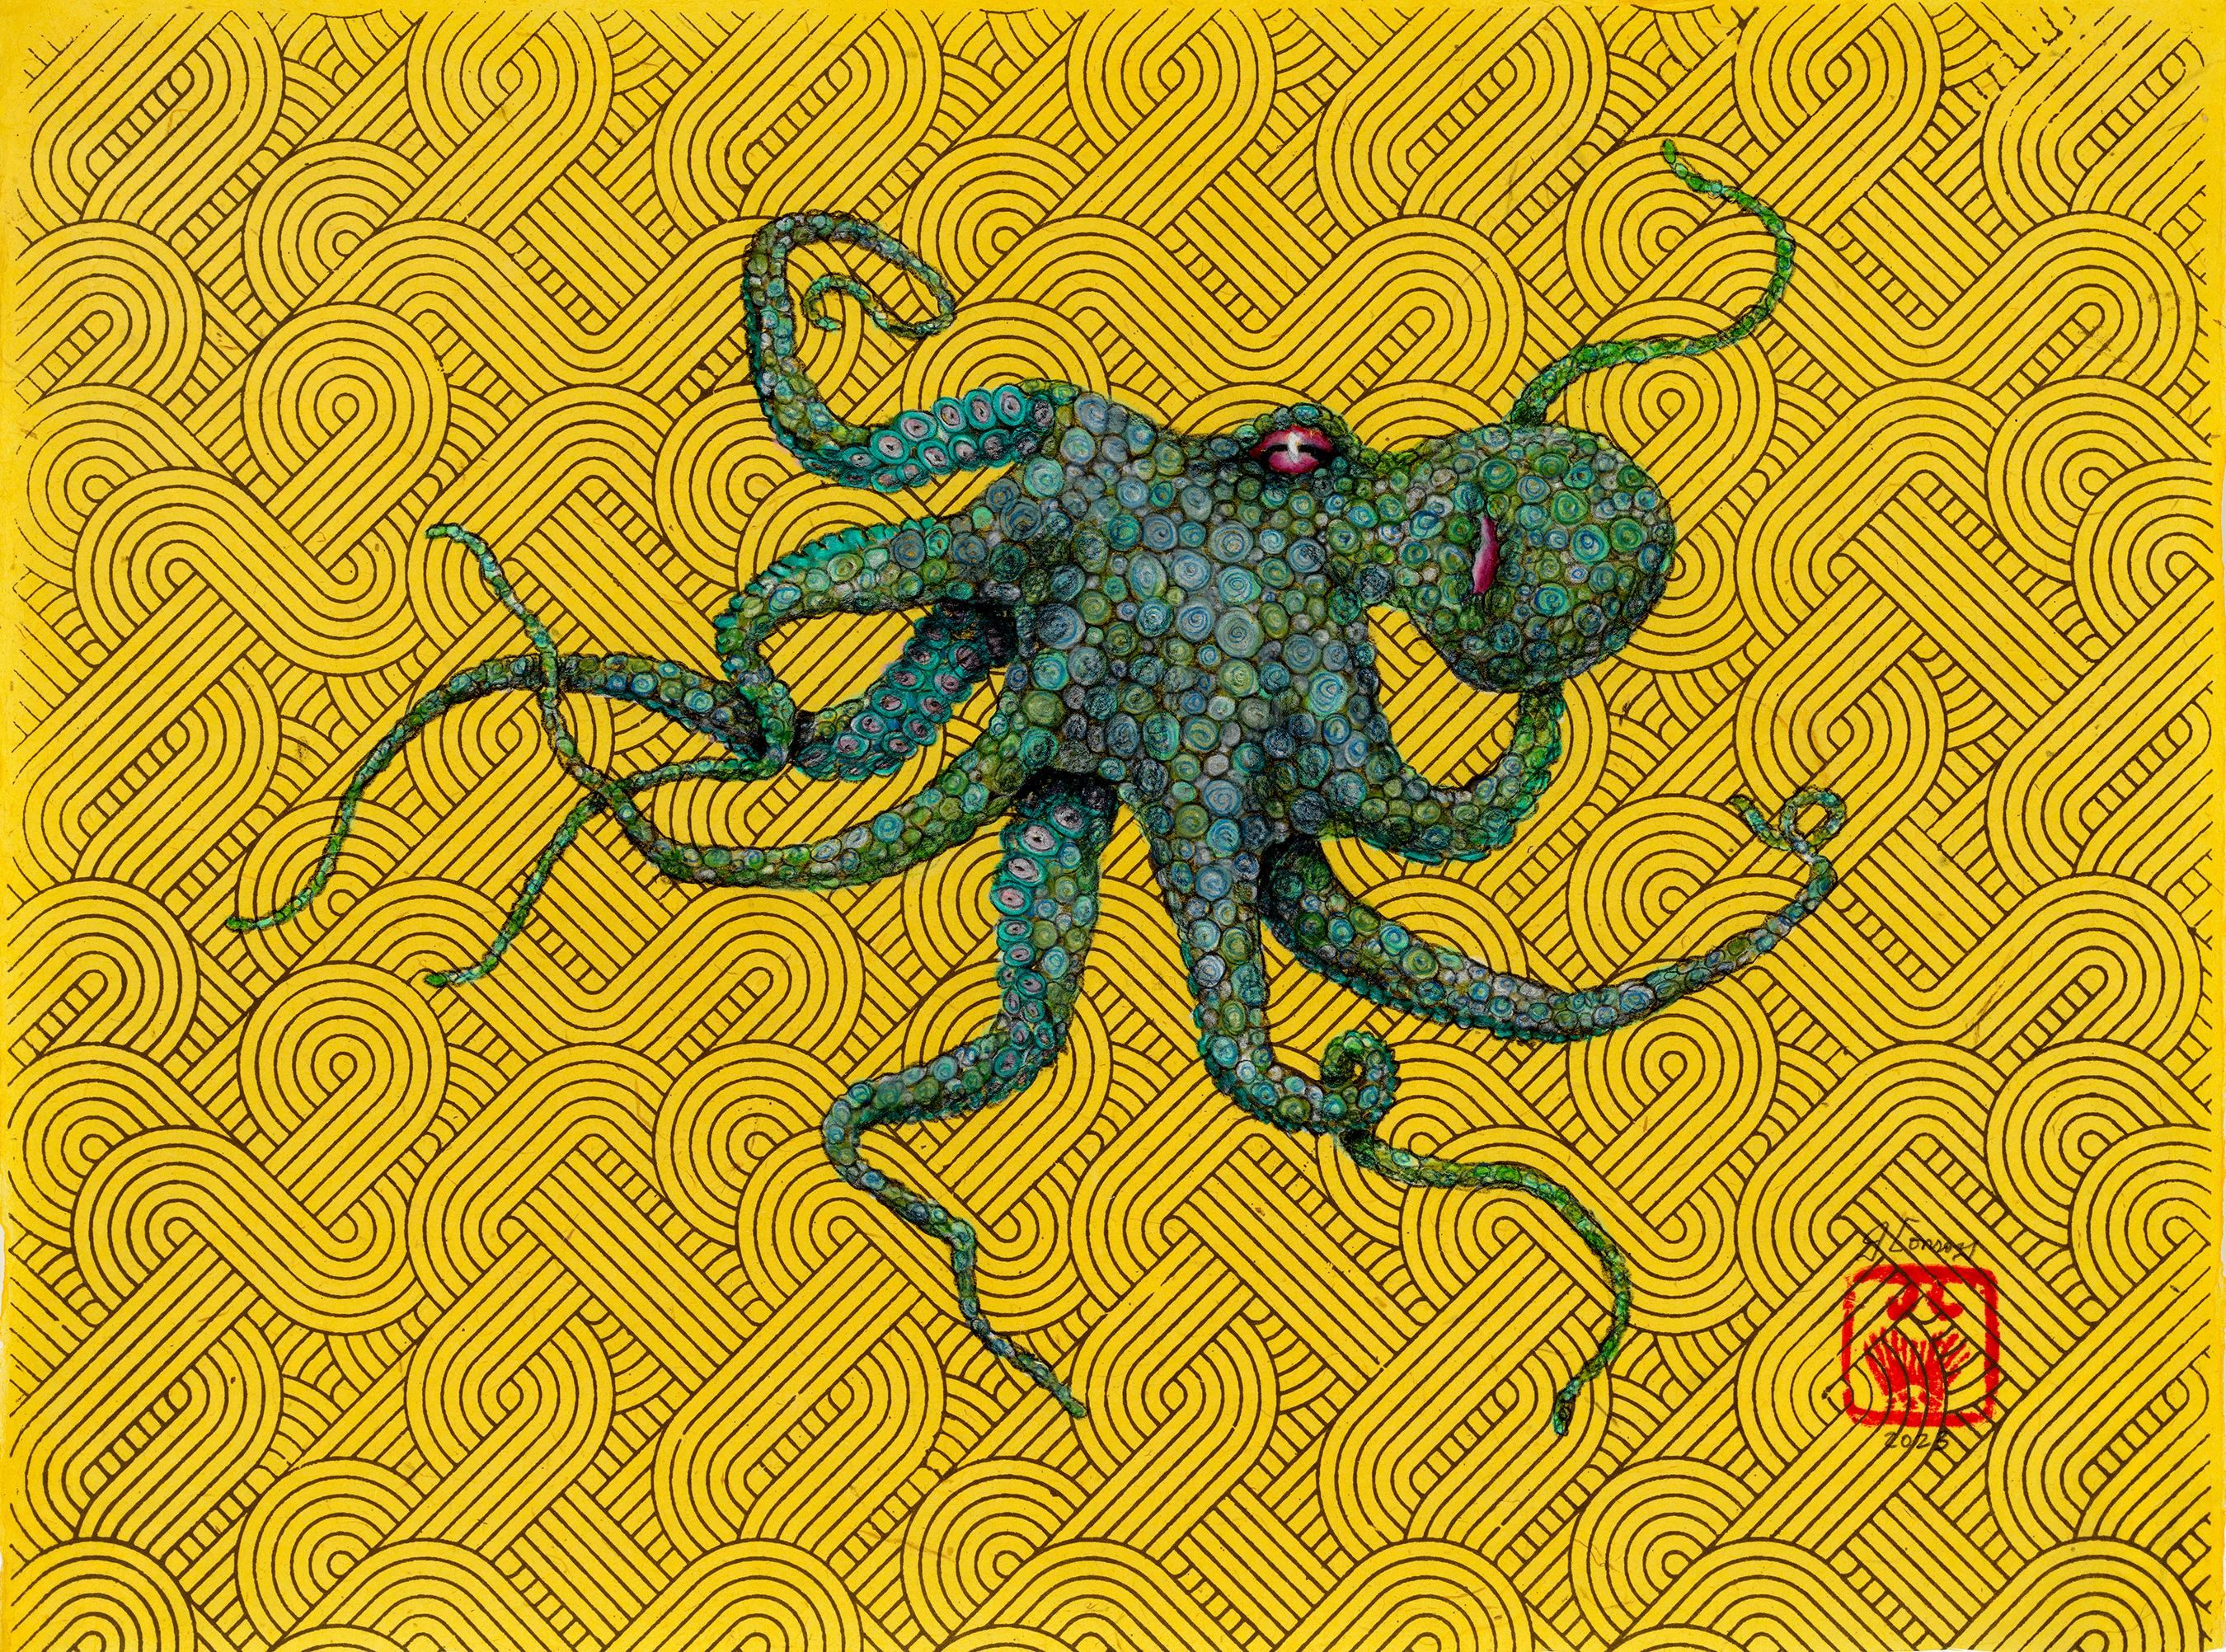 Animal Art Jeff Conroy - Boucle d'or - Goblin vert - Gyotaku Style Sumi Ink Painting of an Octopus (peinture à l'encre Sumi d'une pieuvre)